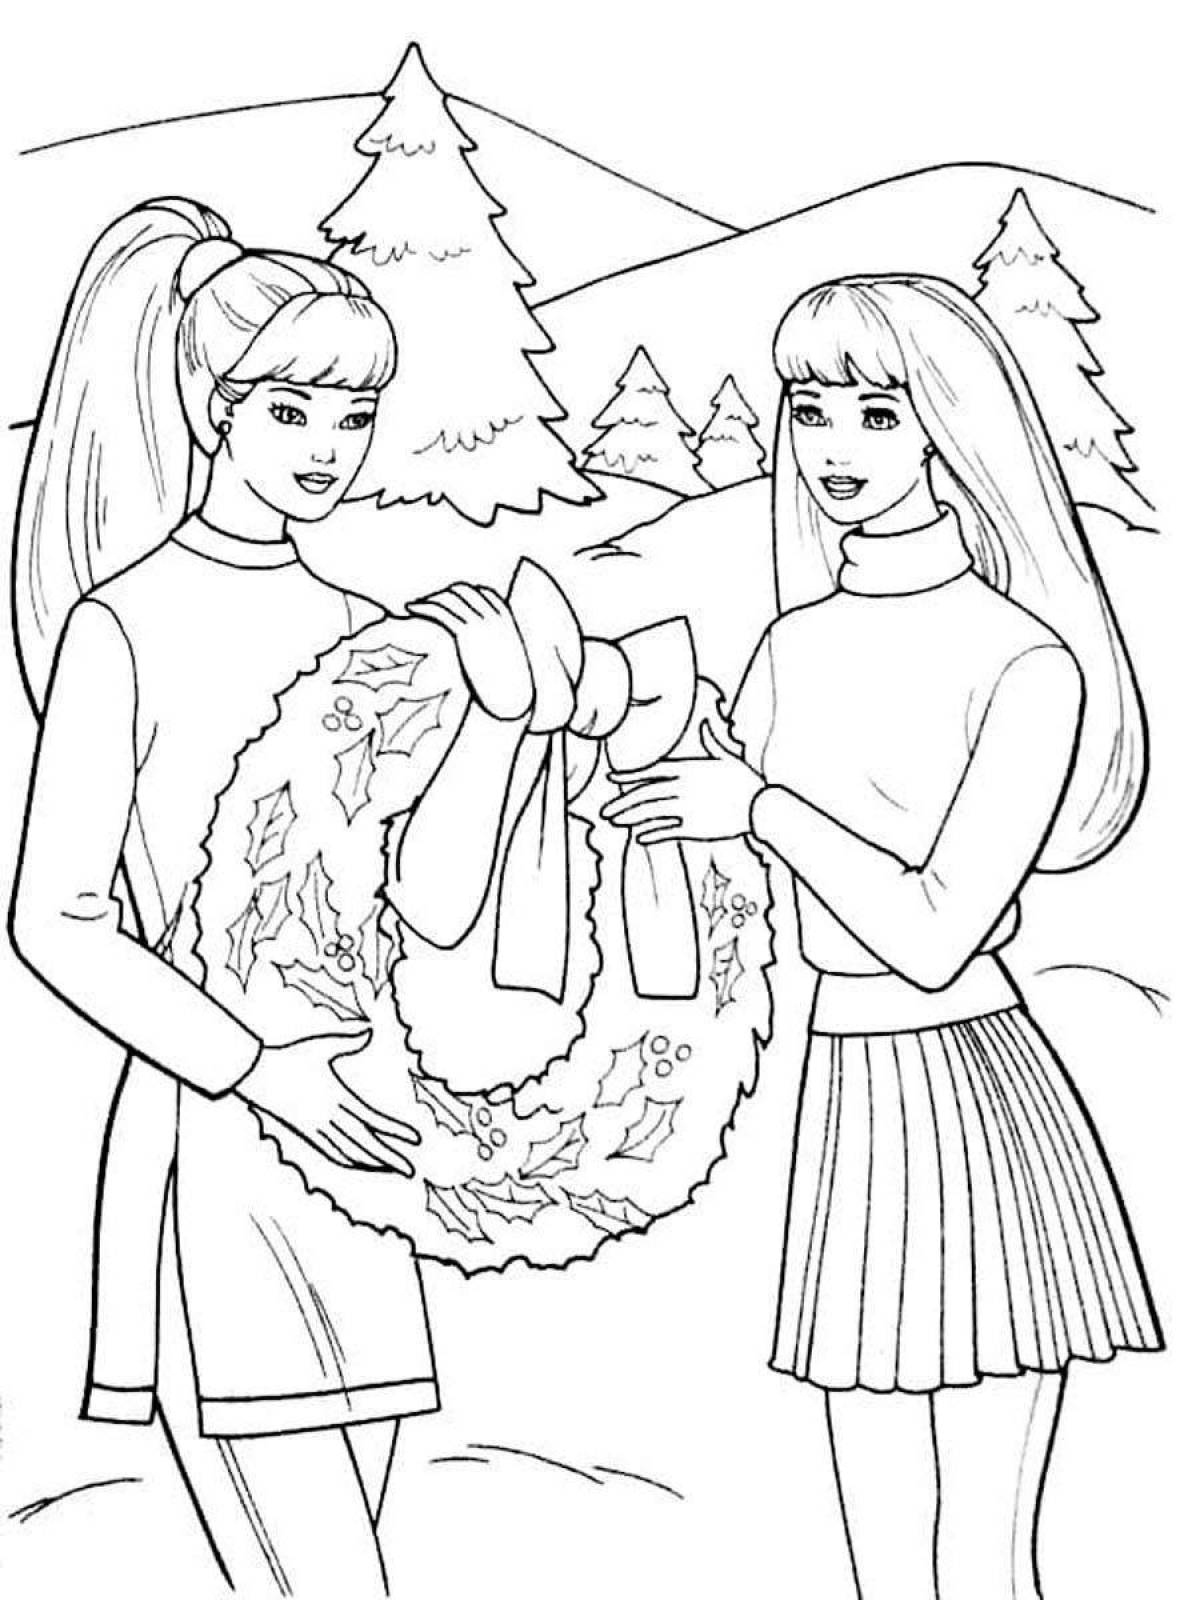 Barbie's gorgeous Christmas coloring book